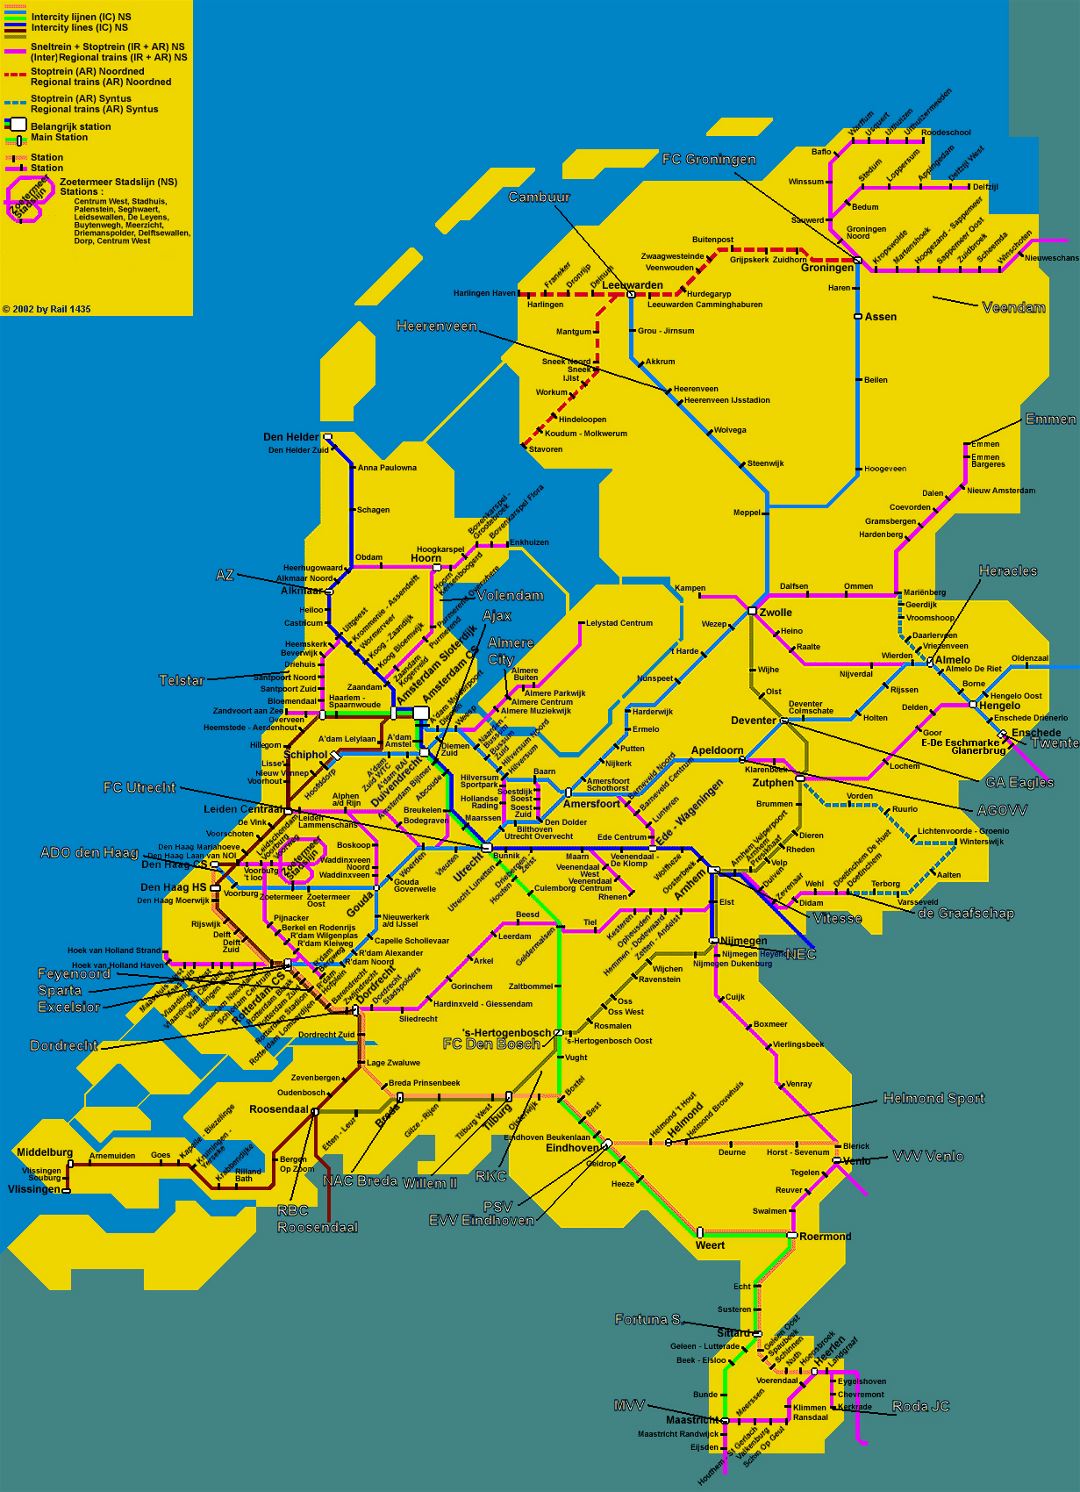 Detailed train map of Netherlands (Holland)